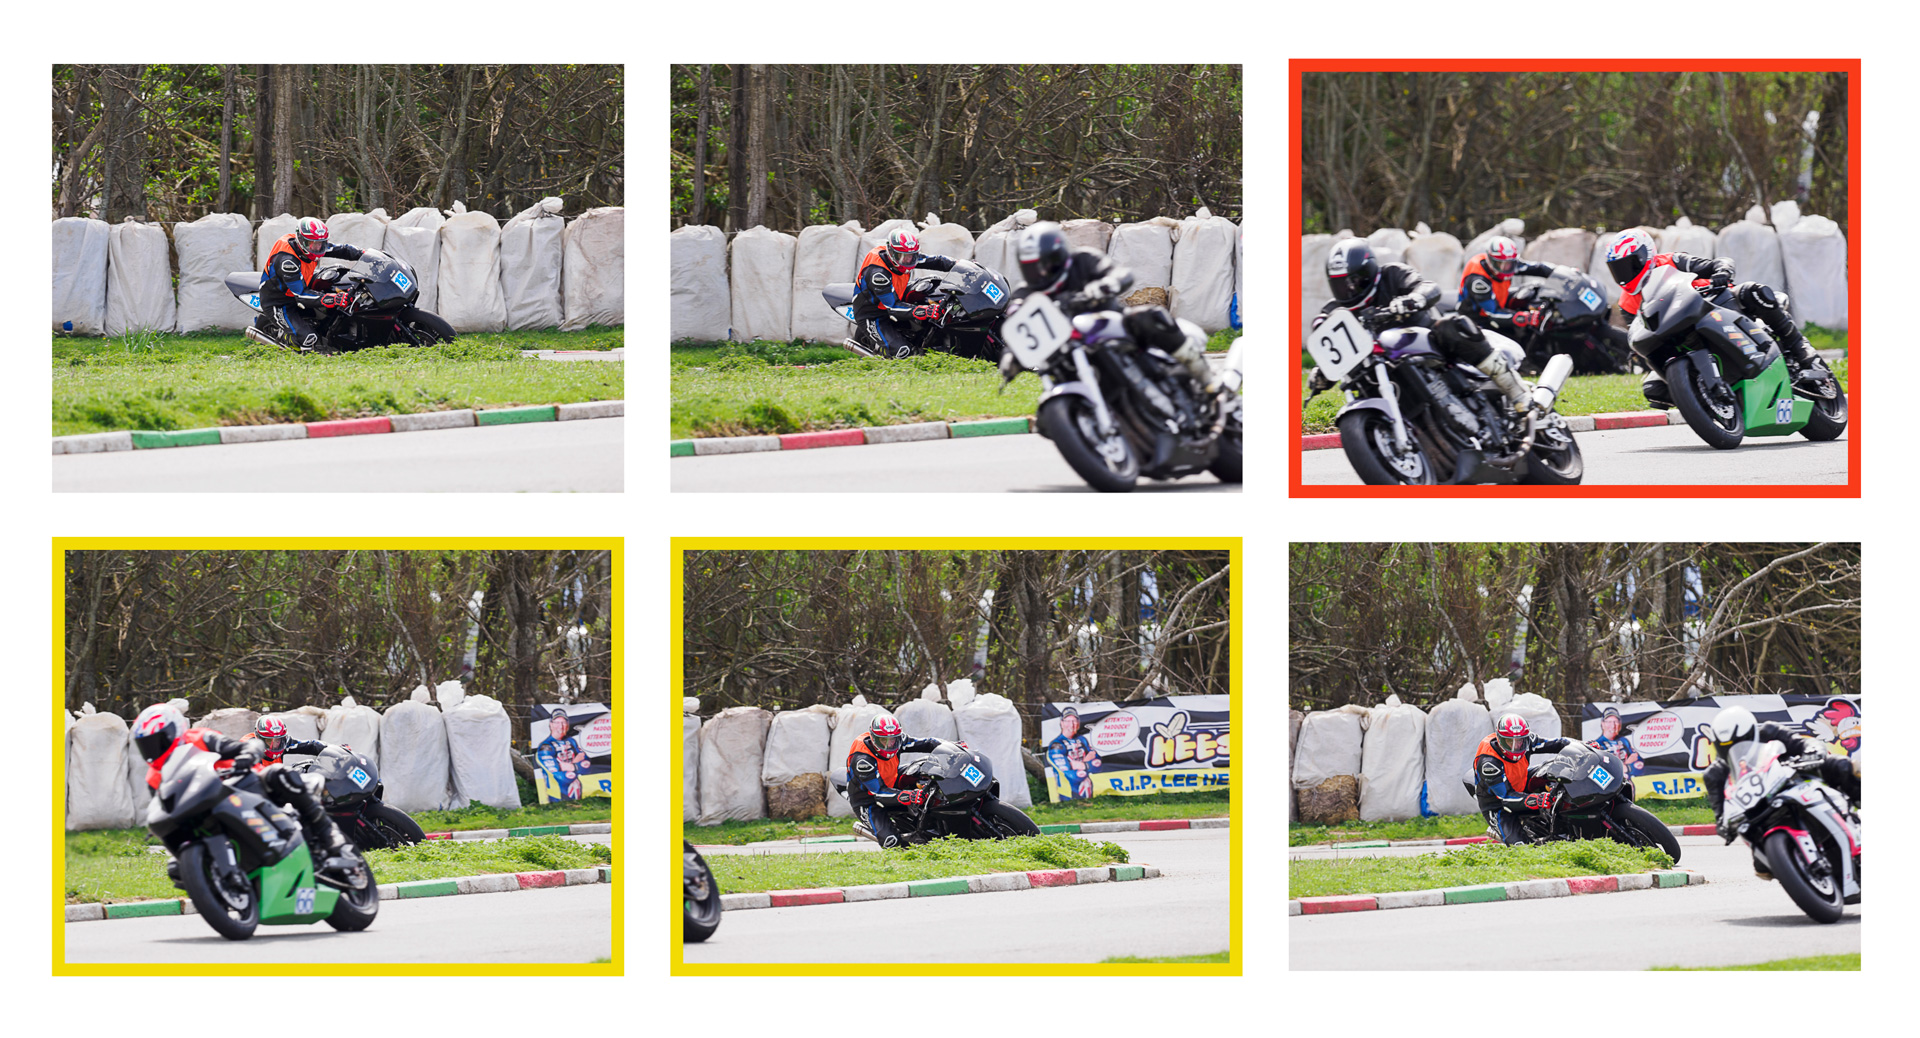 sequence of six frames with a biker racer being covered by two other bikes in the foreground momentarily